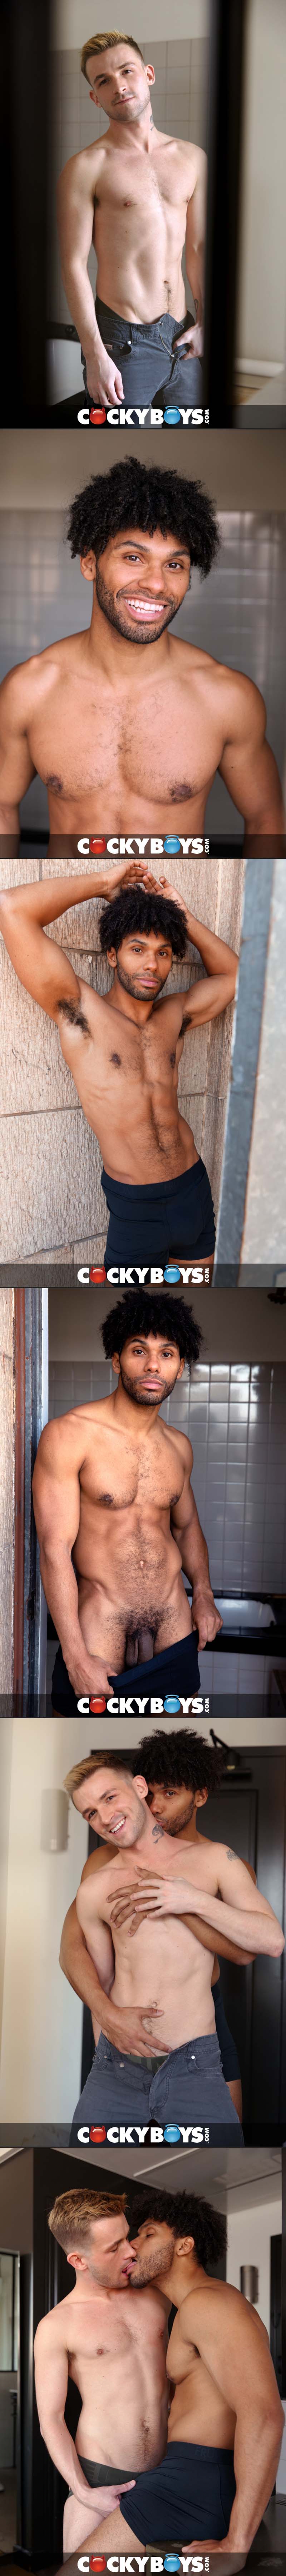 Tony Genius and Lane Colten's Wild Gym Hook-Up at CockyBoys